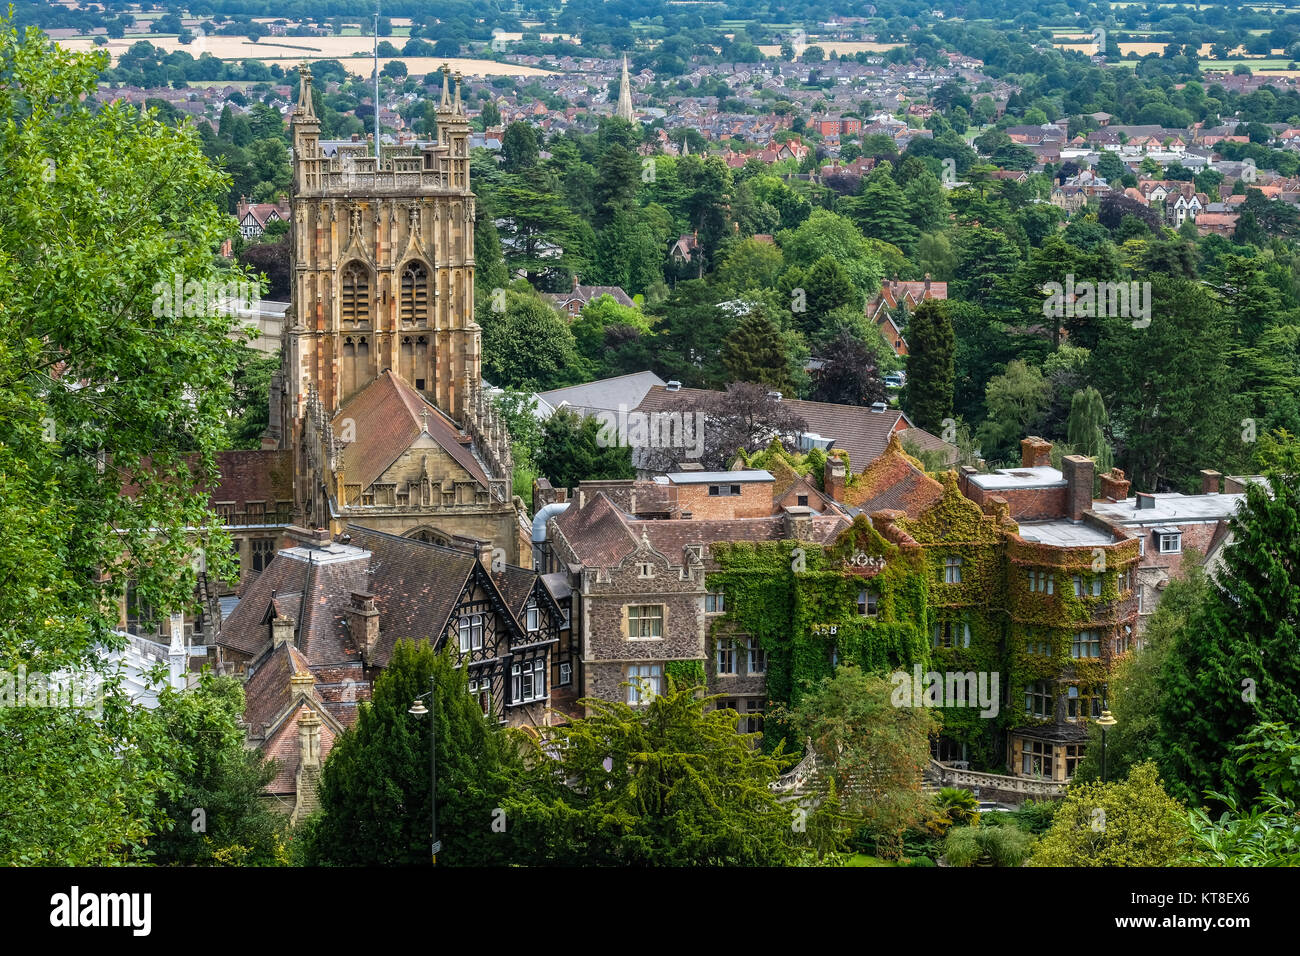 The Abbey Hotel and Great Malvern Priory, The Parish Church of St Mary and St Michael, Malvern, Worcestershire, England, view from Foley Terrace Stock Photo